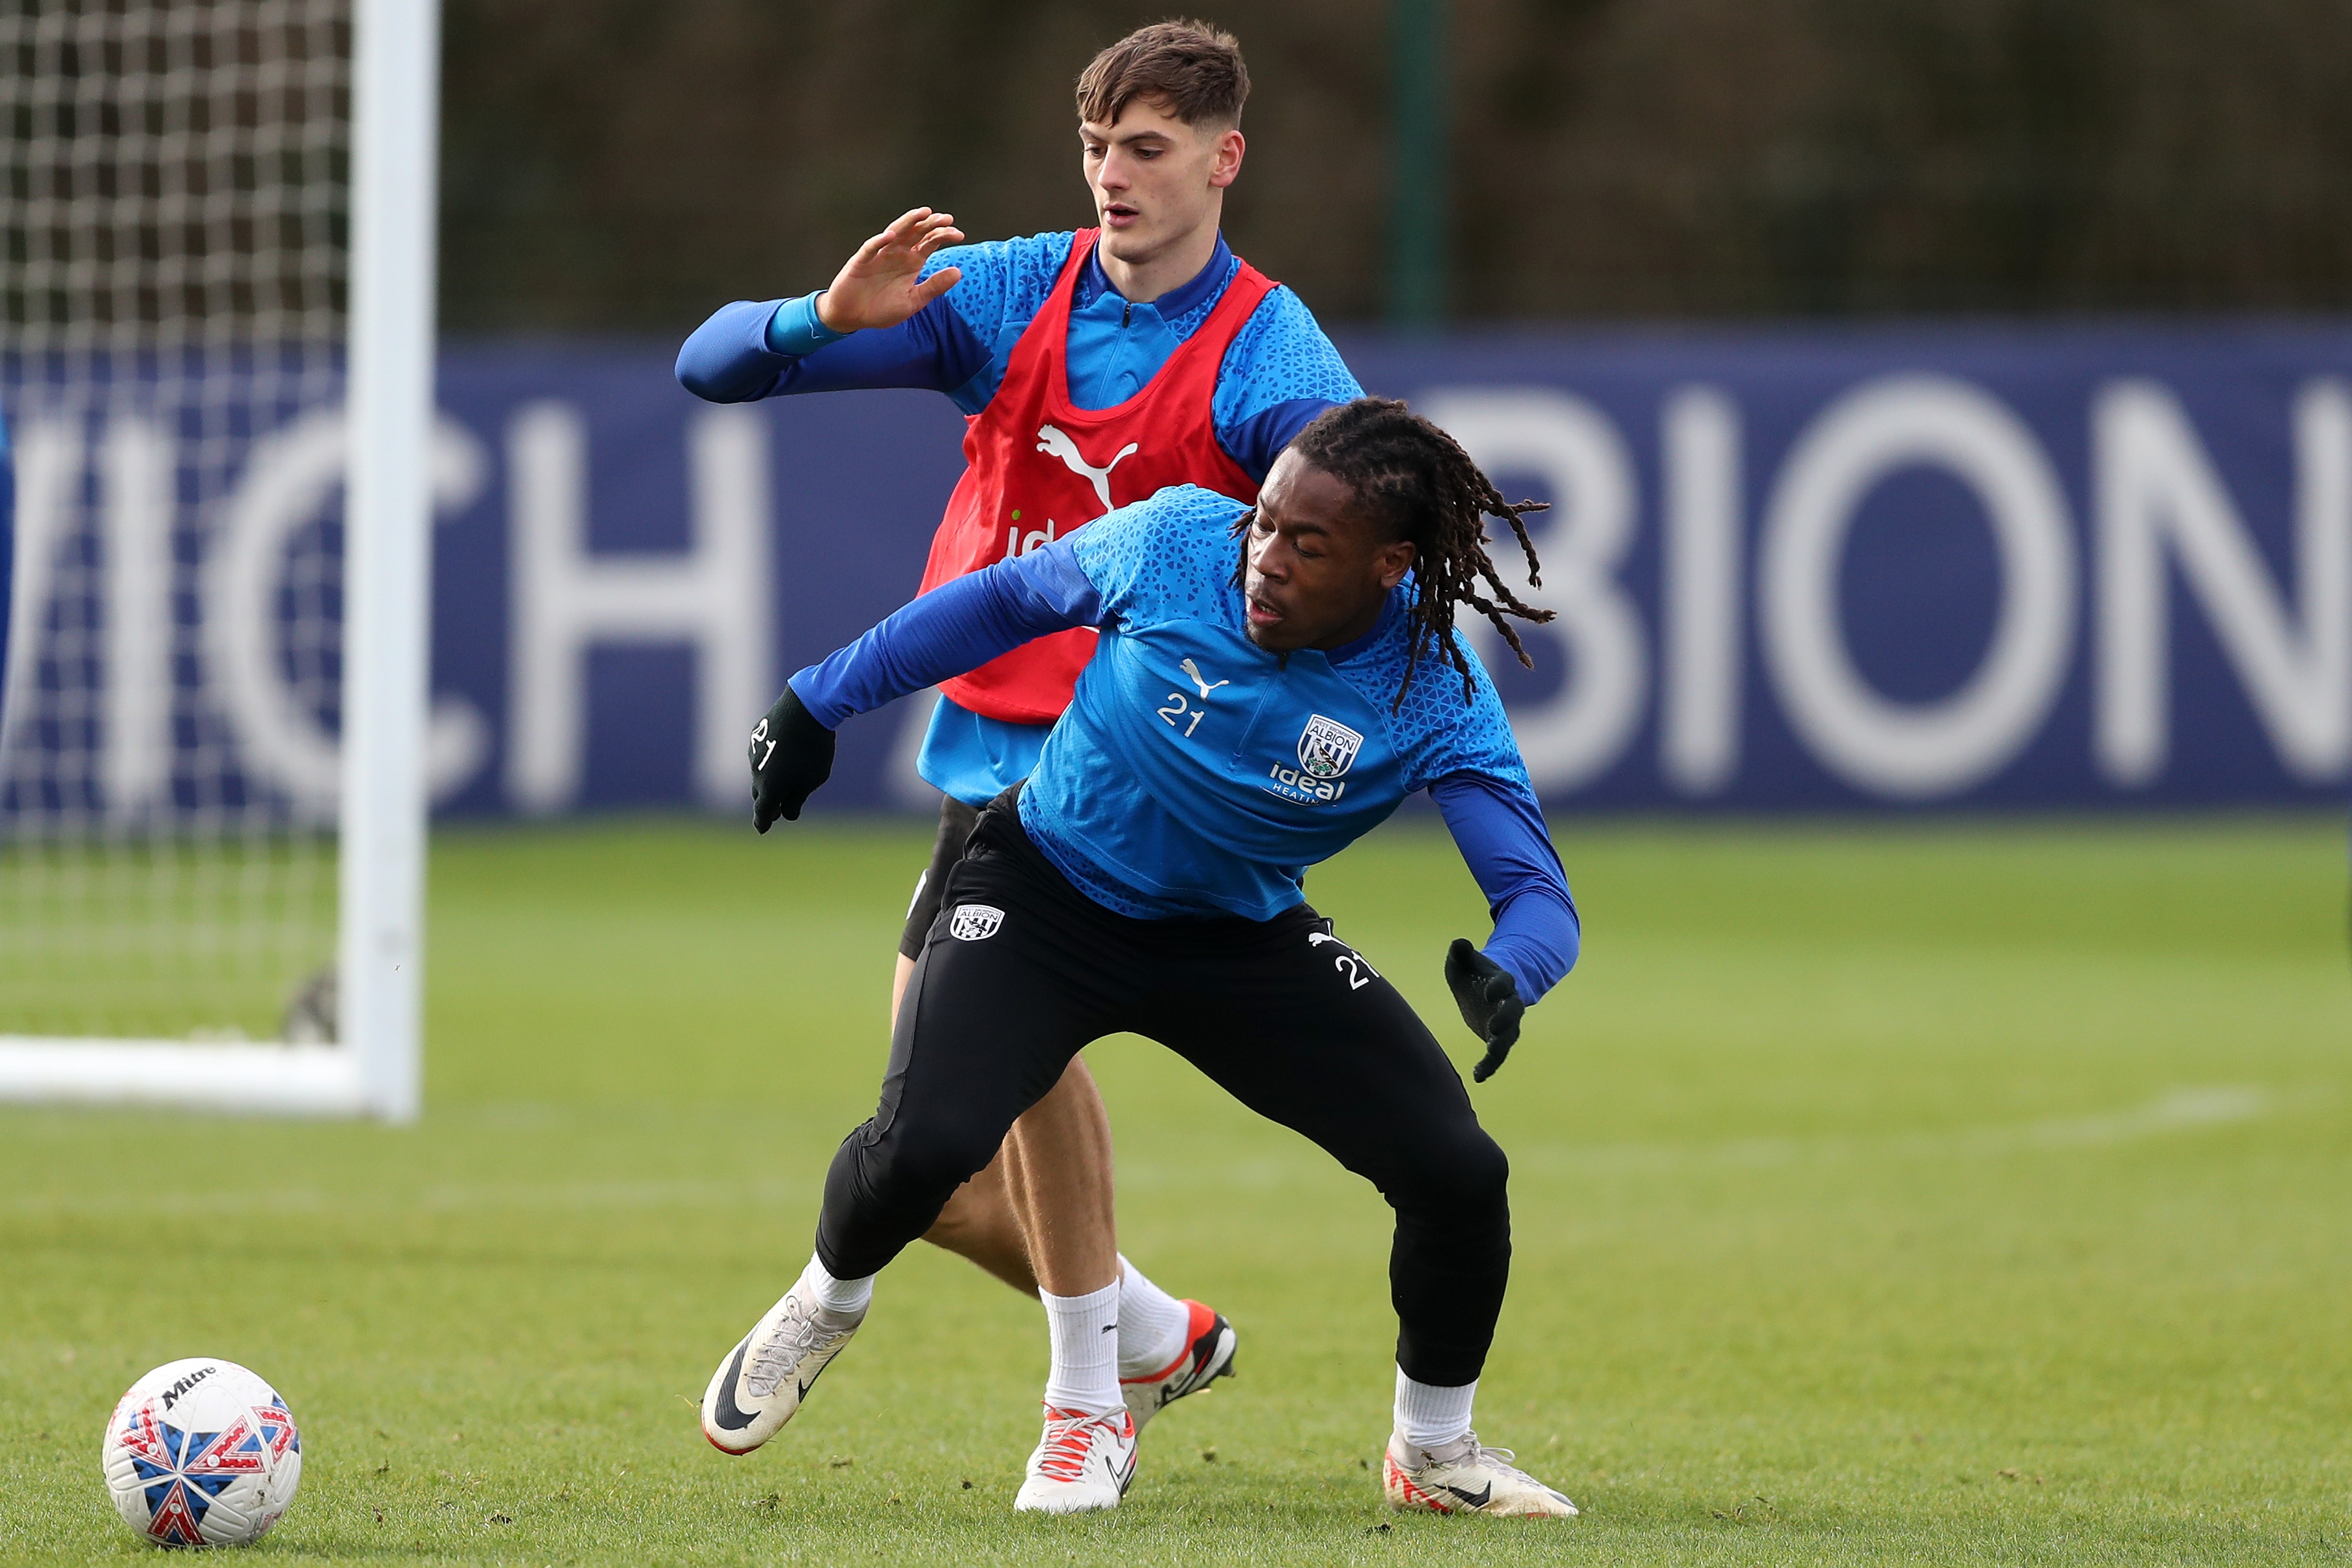 Brandon Thomas-Asante and Caleb Taylor fight for the ball in training 